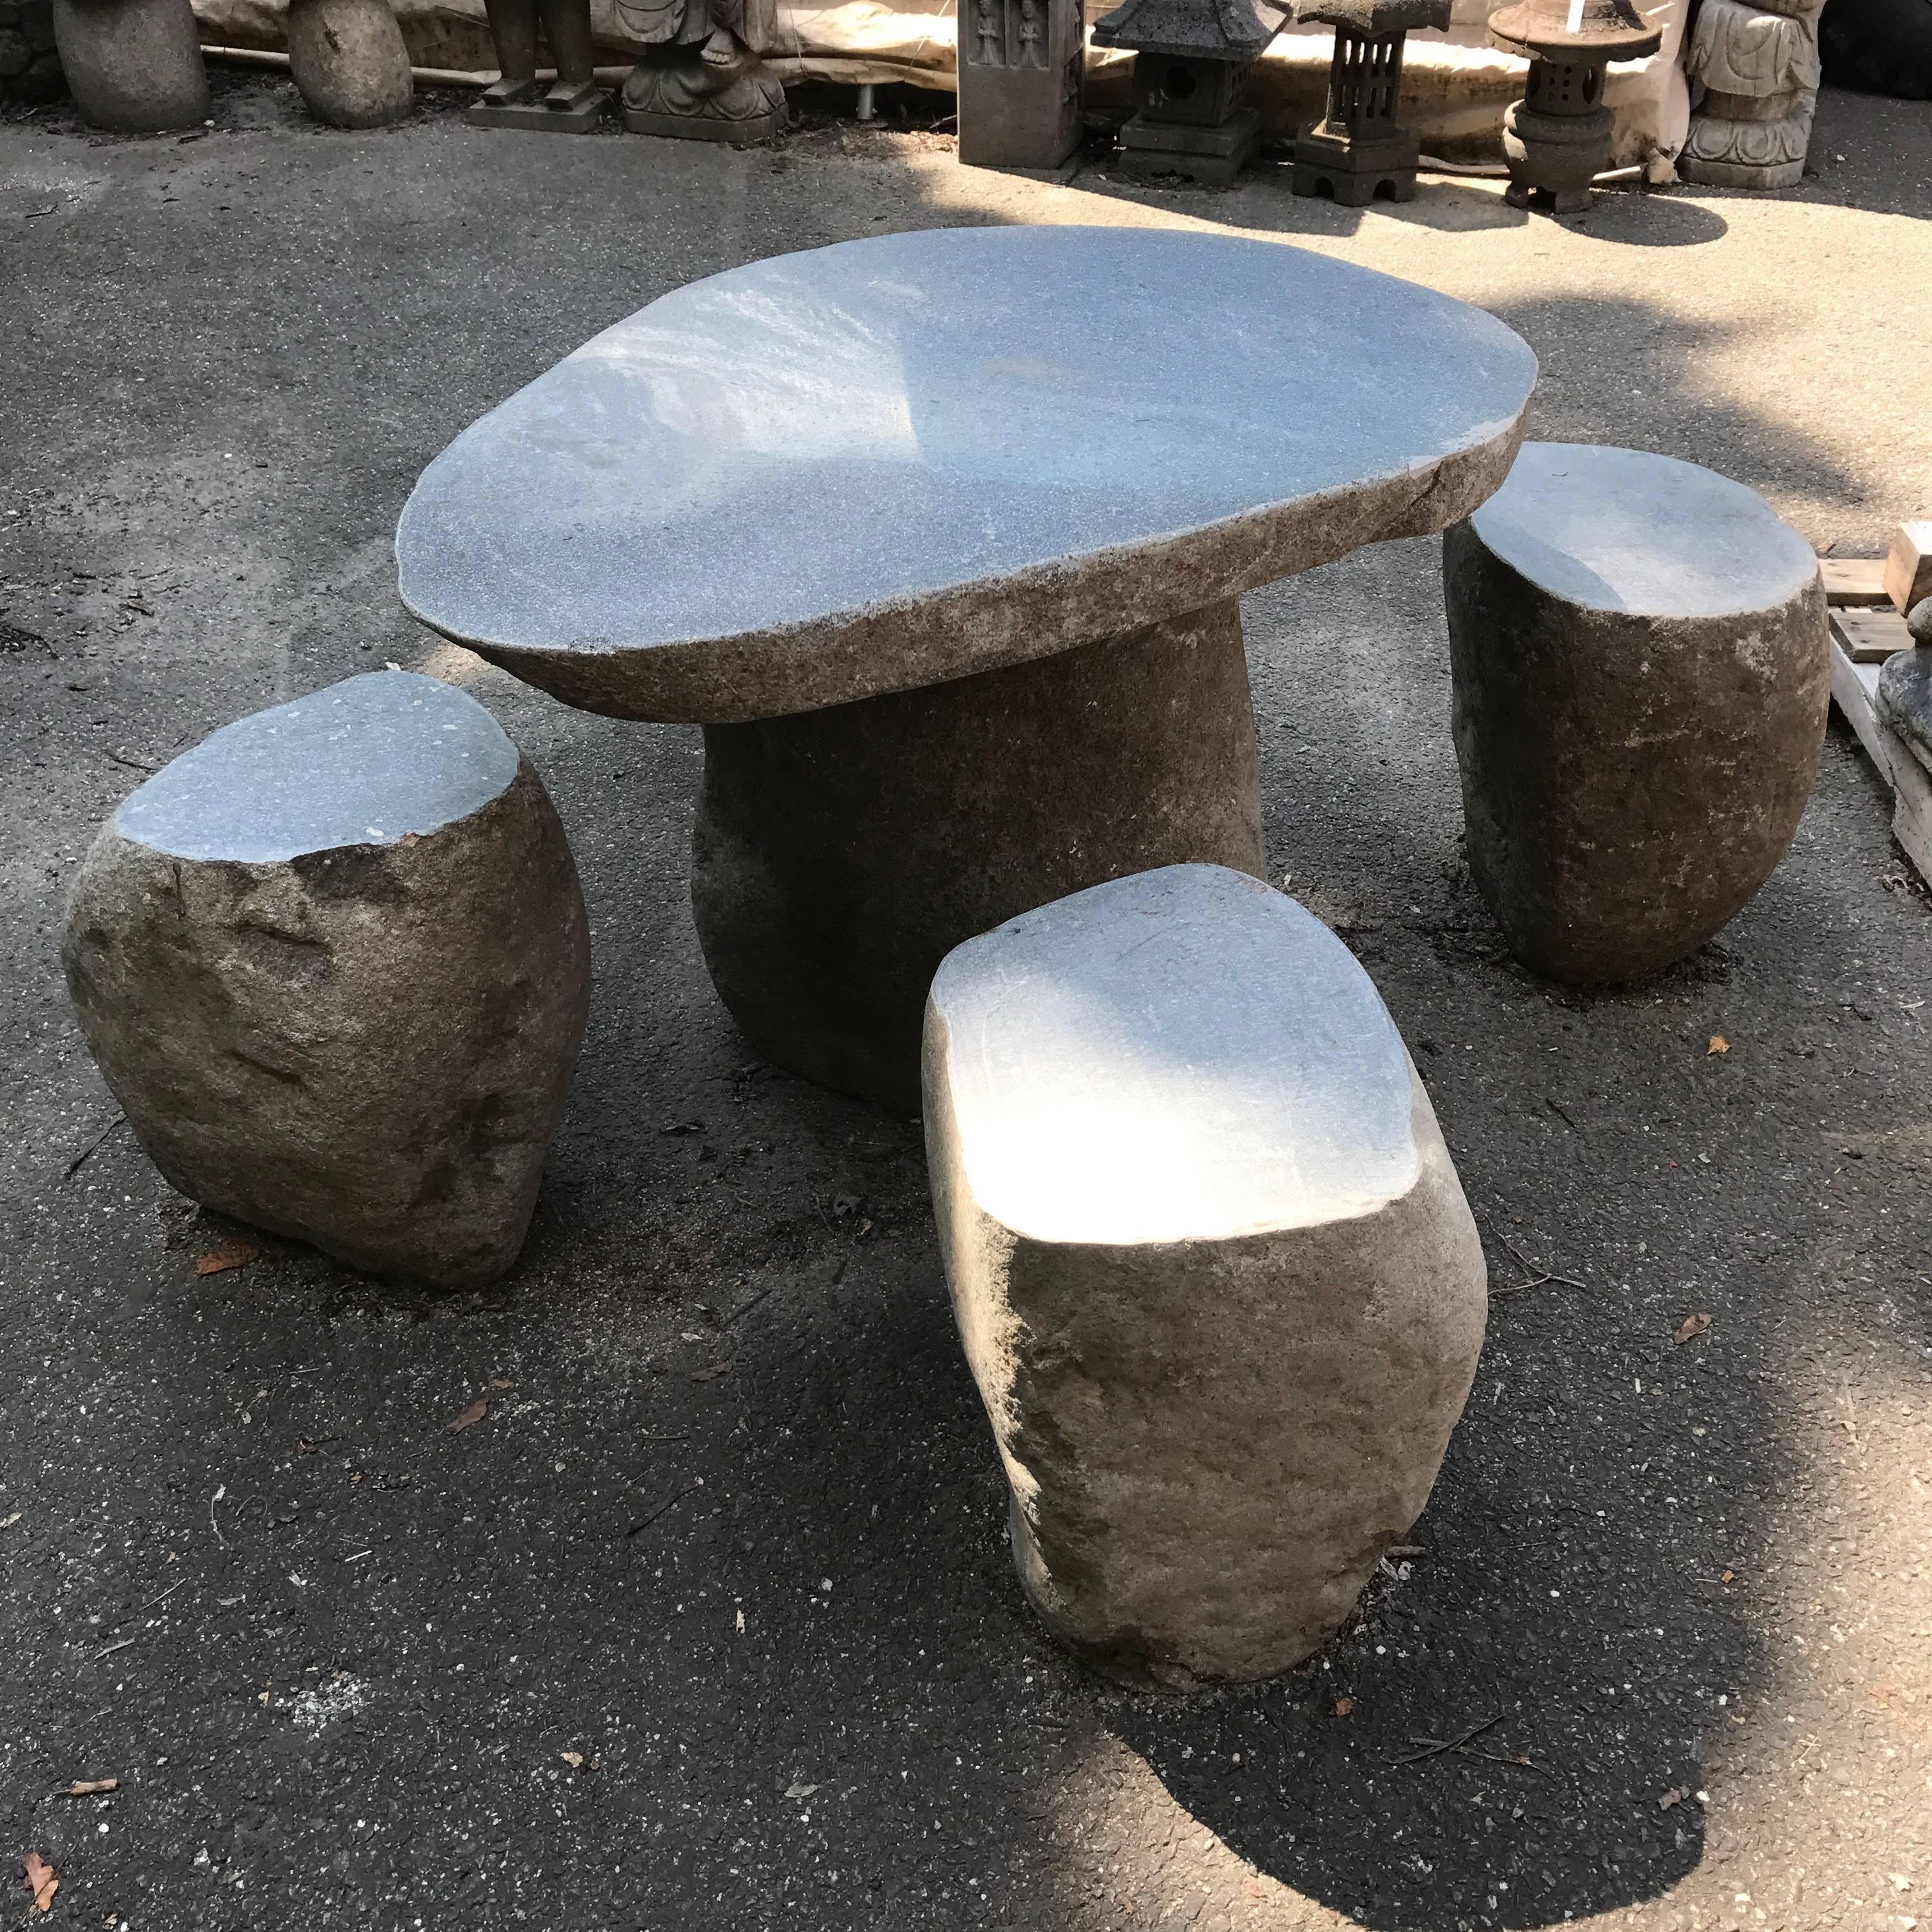 Hand-Carved Garden Stone Table & Stools Six Pieces Solid Limestone immediate use 2